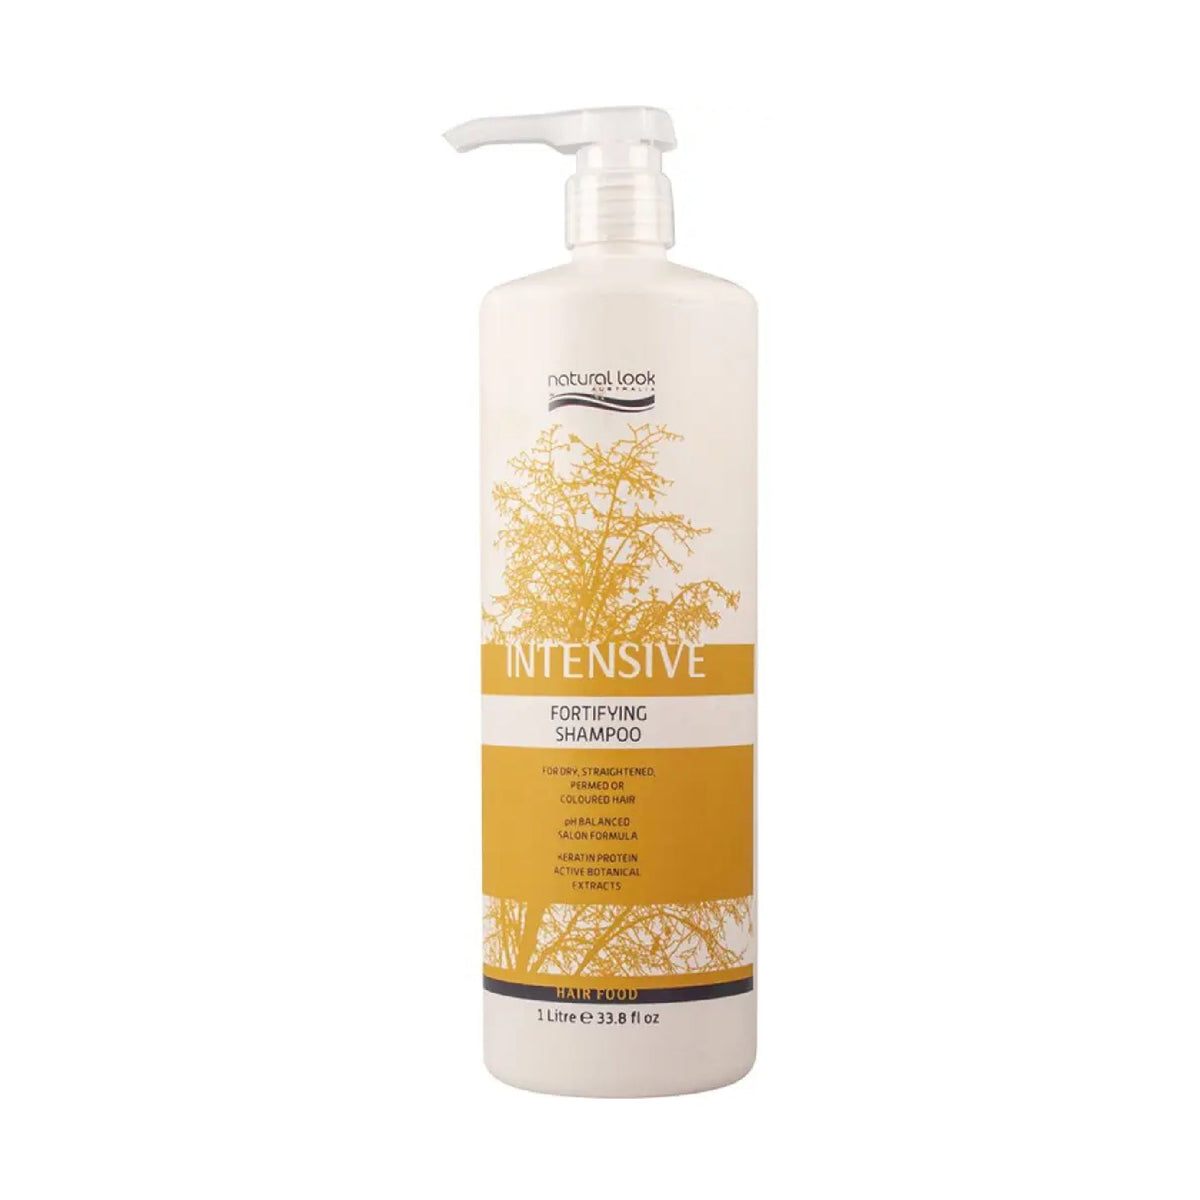 Natural Look Intensive Fortifying Shampoo 1Ltr - Haircare Superstore